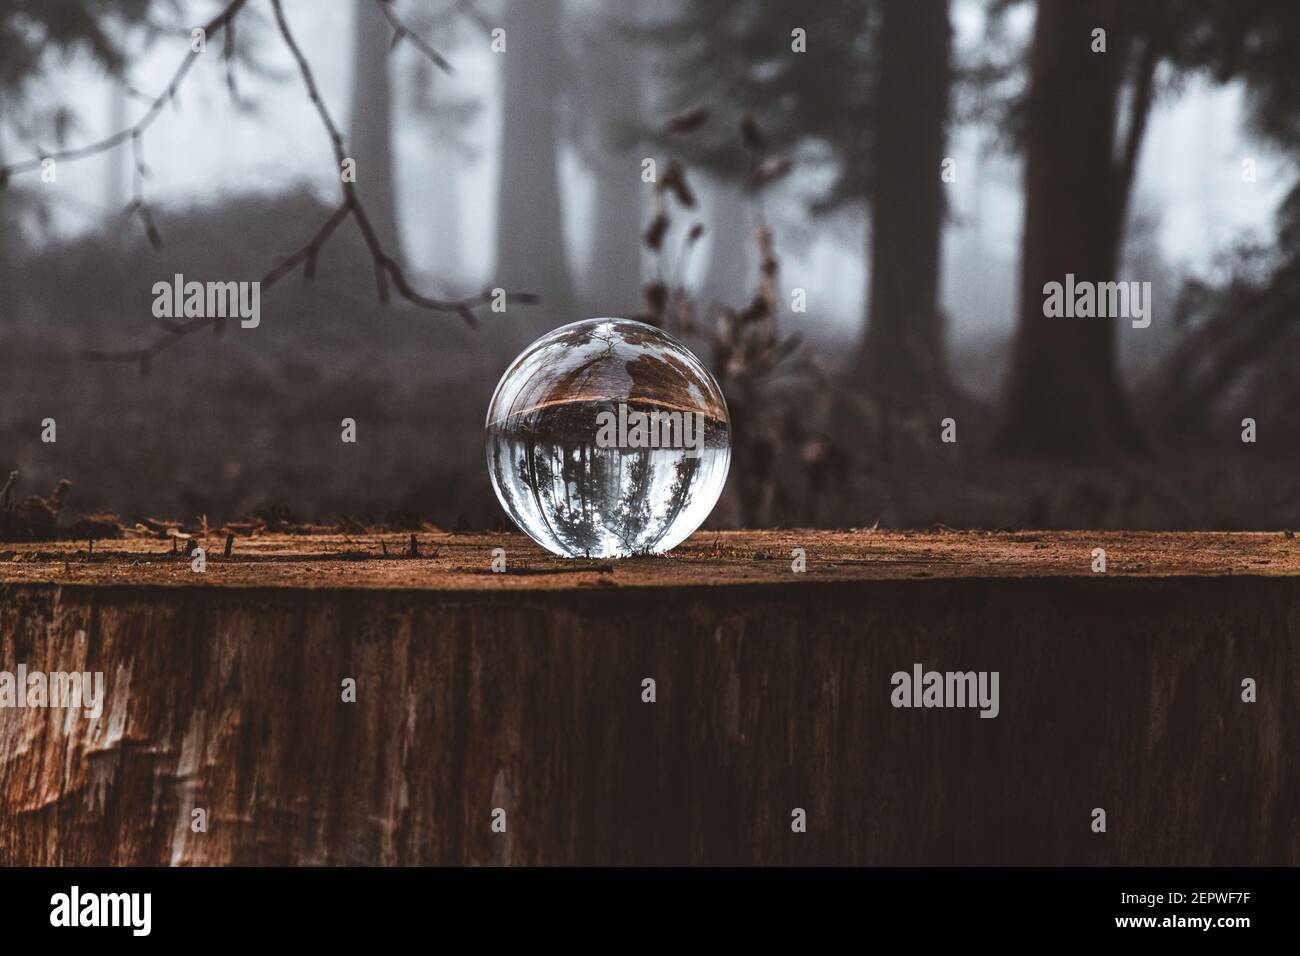 Lensball photography in a misty forest woodland scene Stock Photo